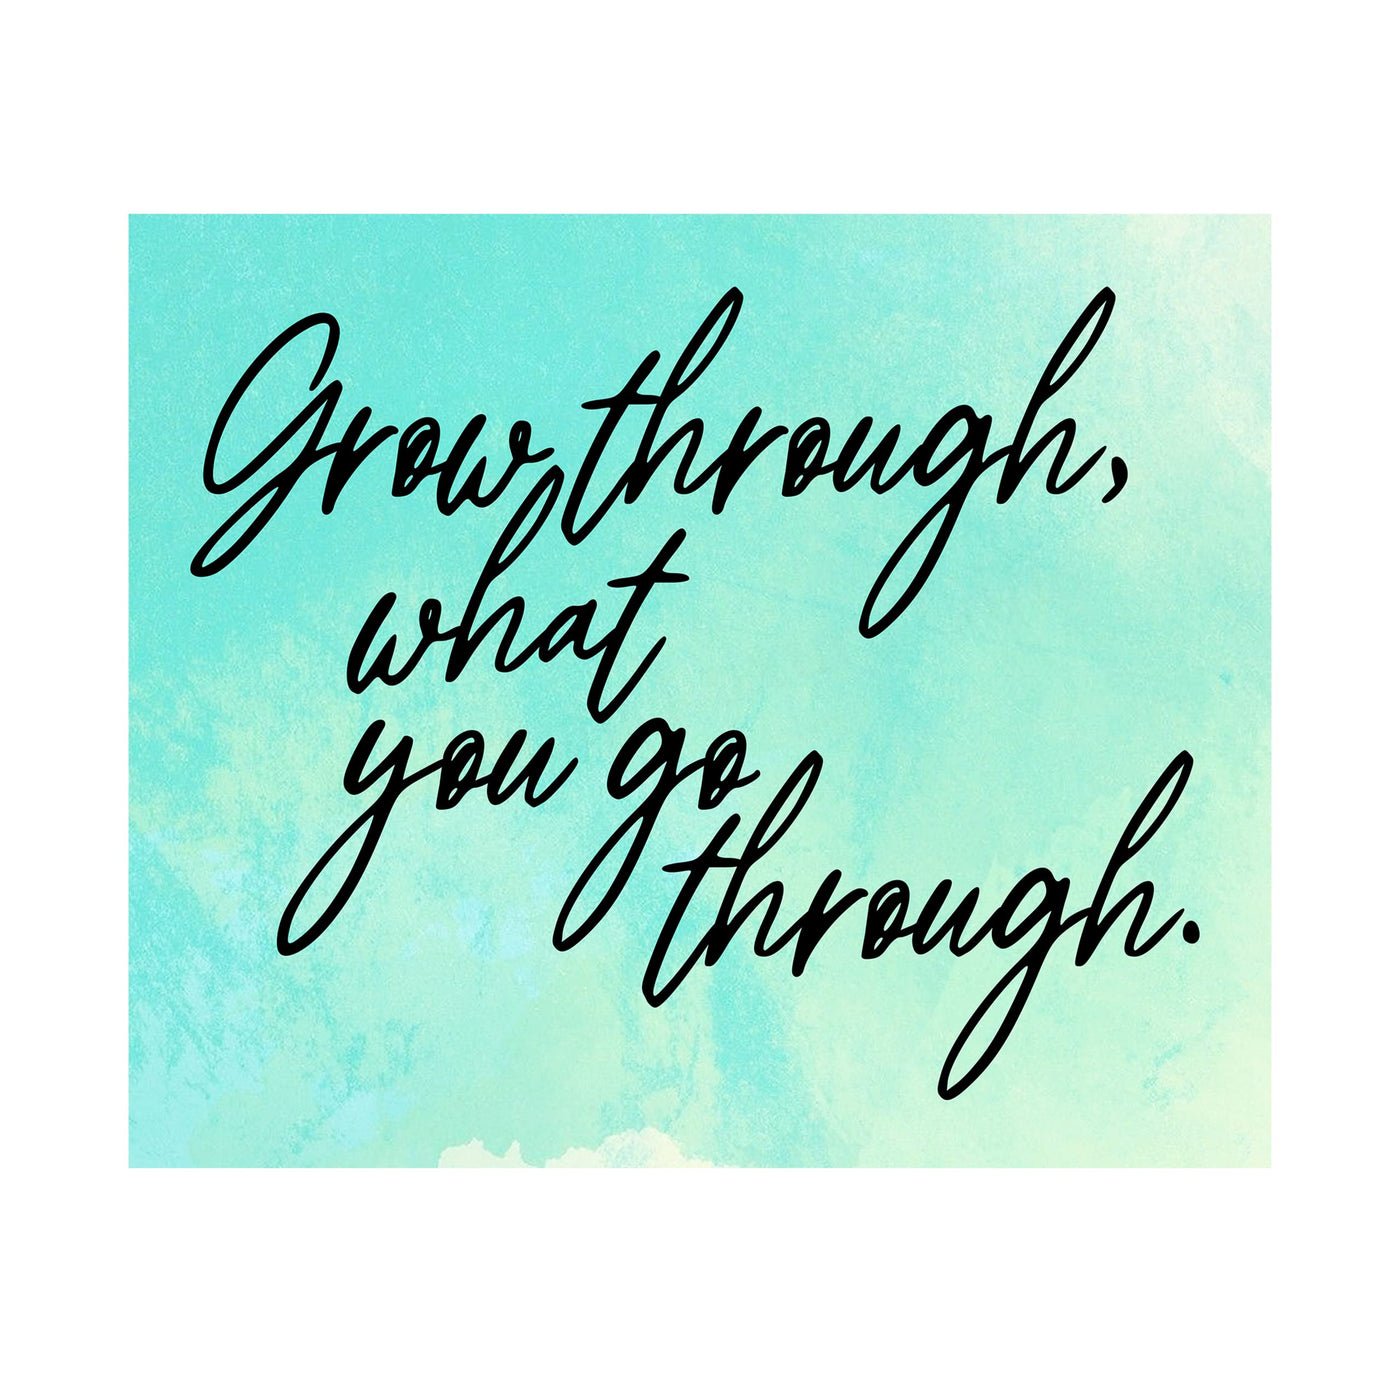 Grow Through What You Go Through Motivational Quotes Wall Decor Sign -10 x 8" Inspirational Replica Watercolor Art Print-Ready to Frame. Home-Office-Desk-School Decoration. Perfect for Motivation!